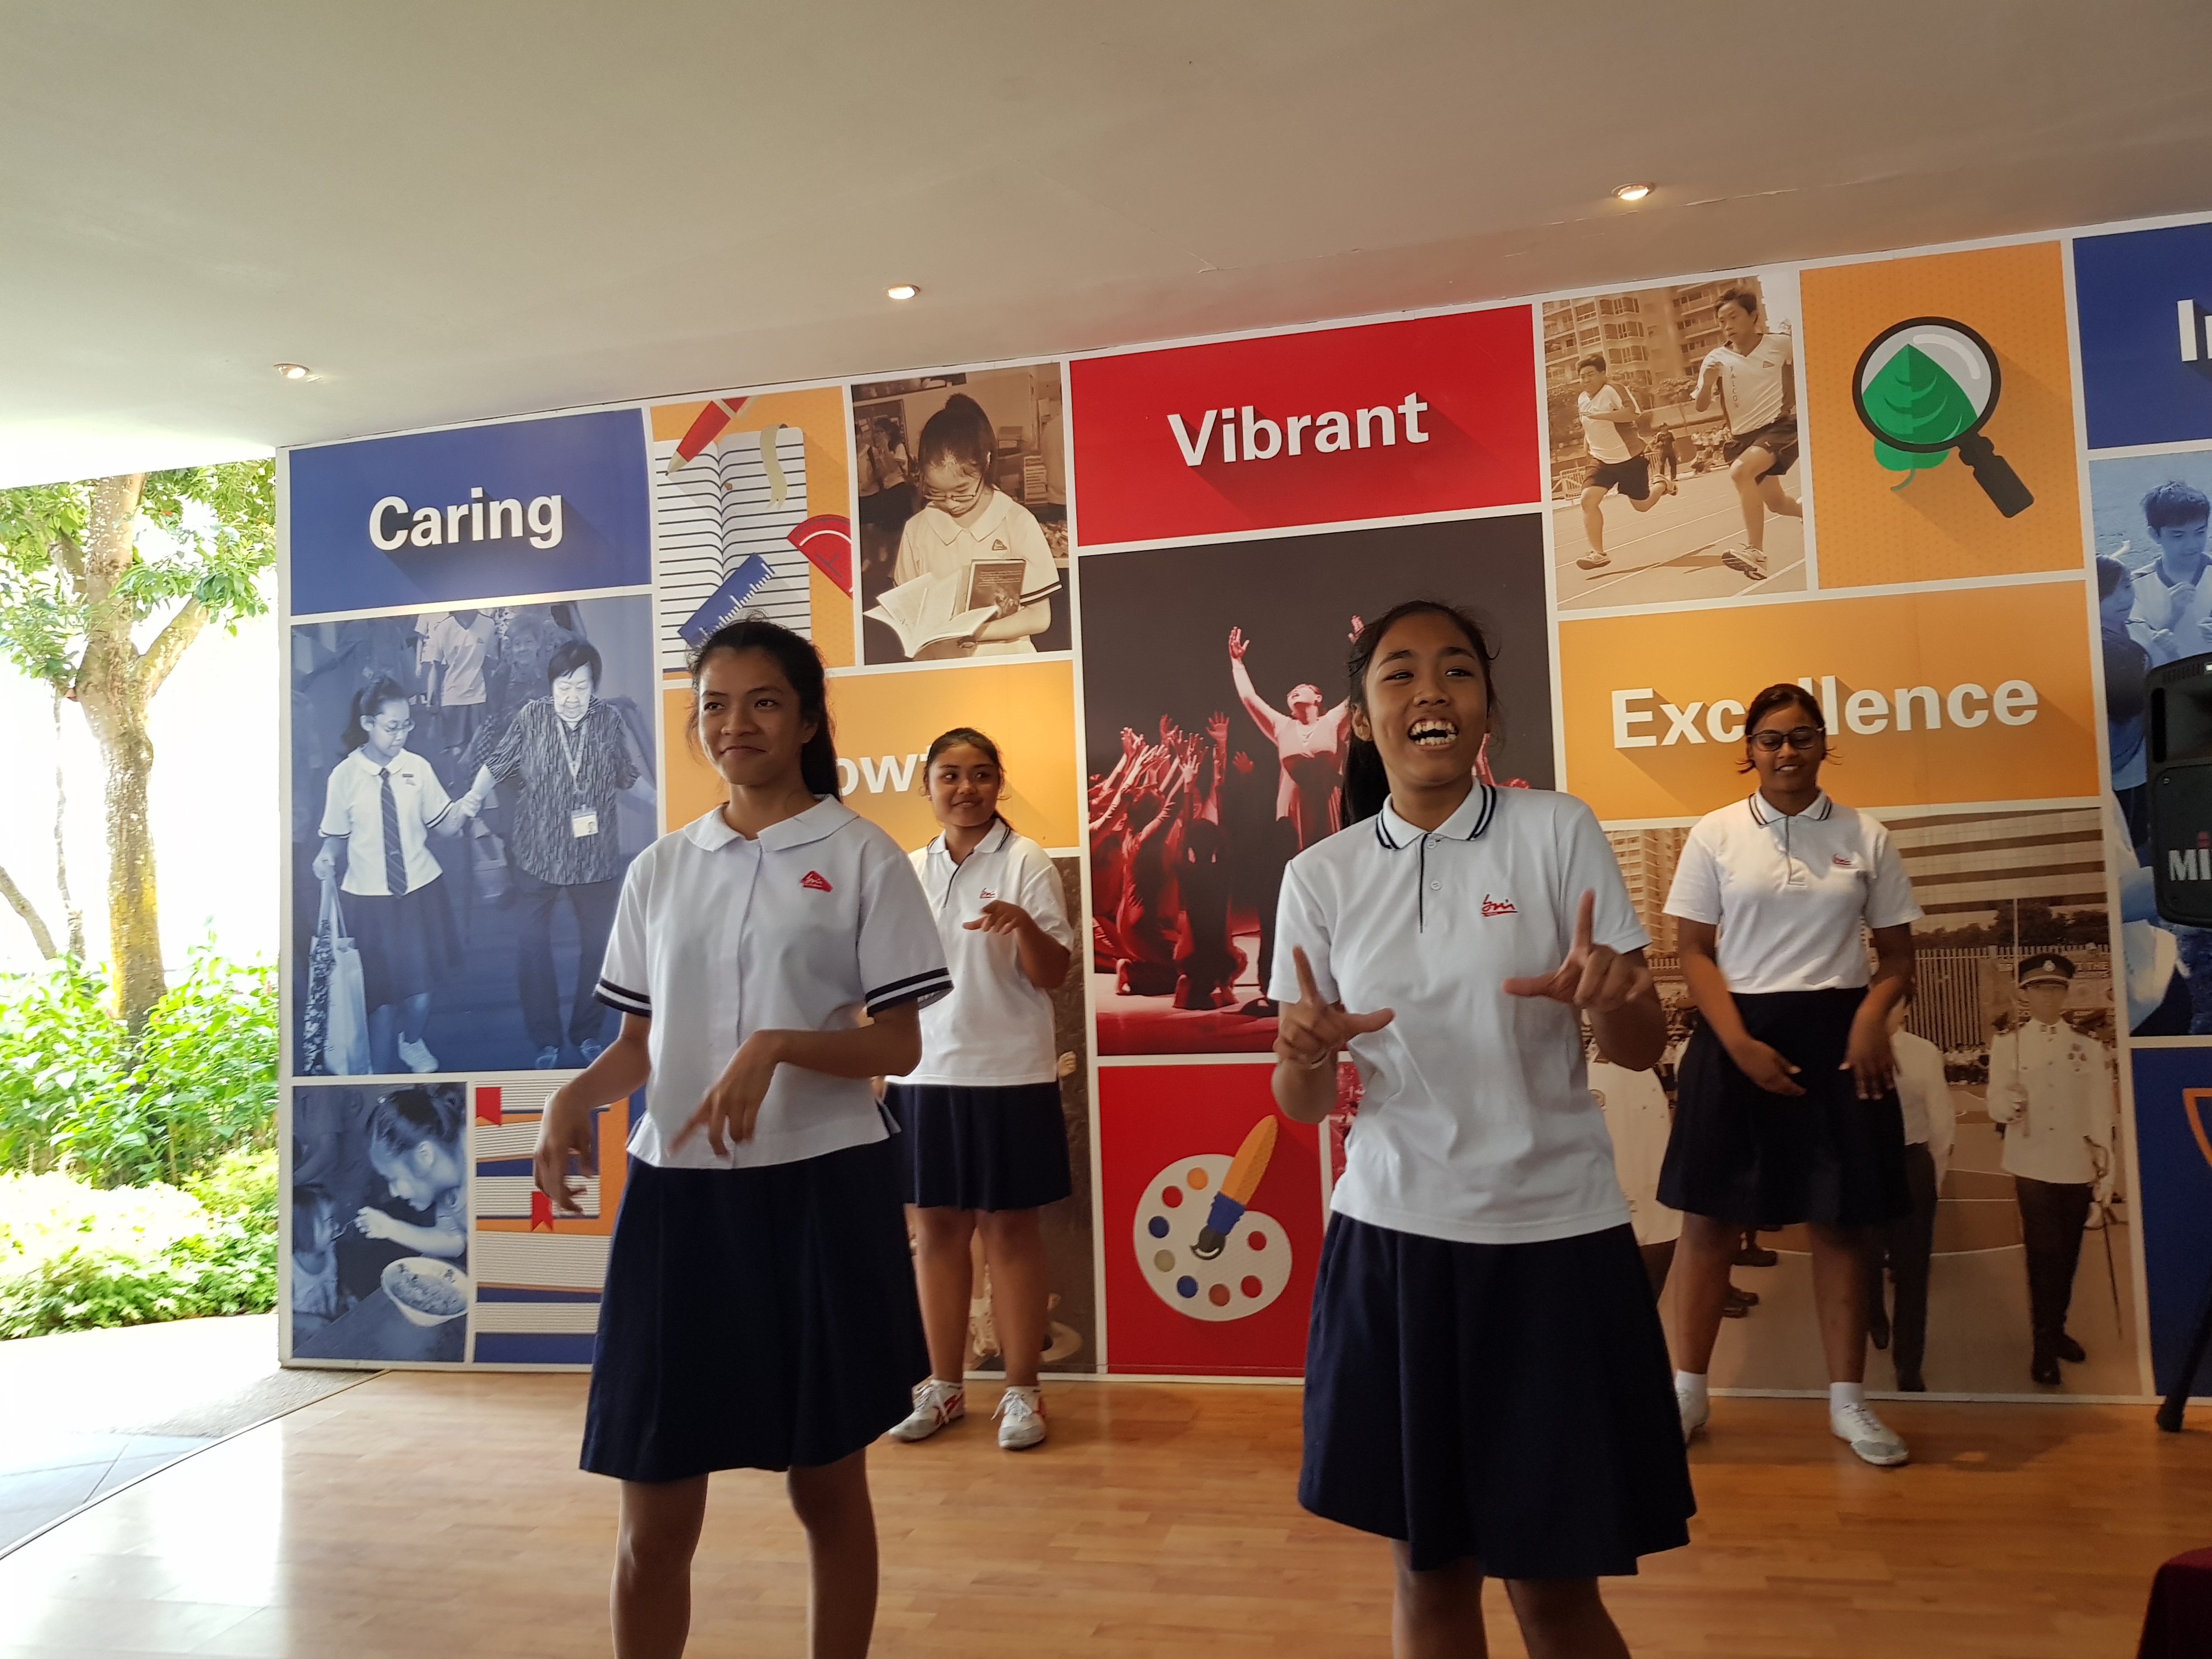 Budding performers wowing their schoolmates at the Talent Corner weekly performances.

Photo credit: Bukit Merah Secondary School
